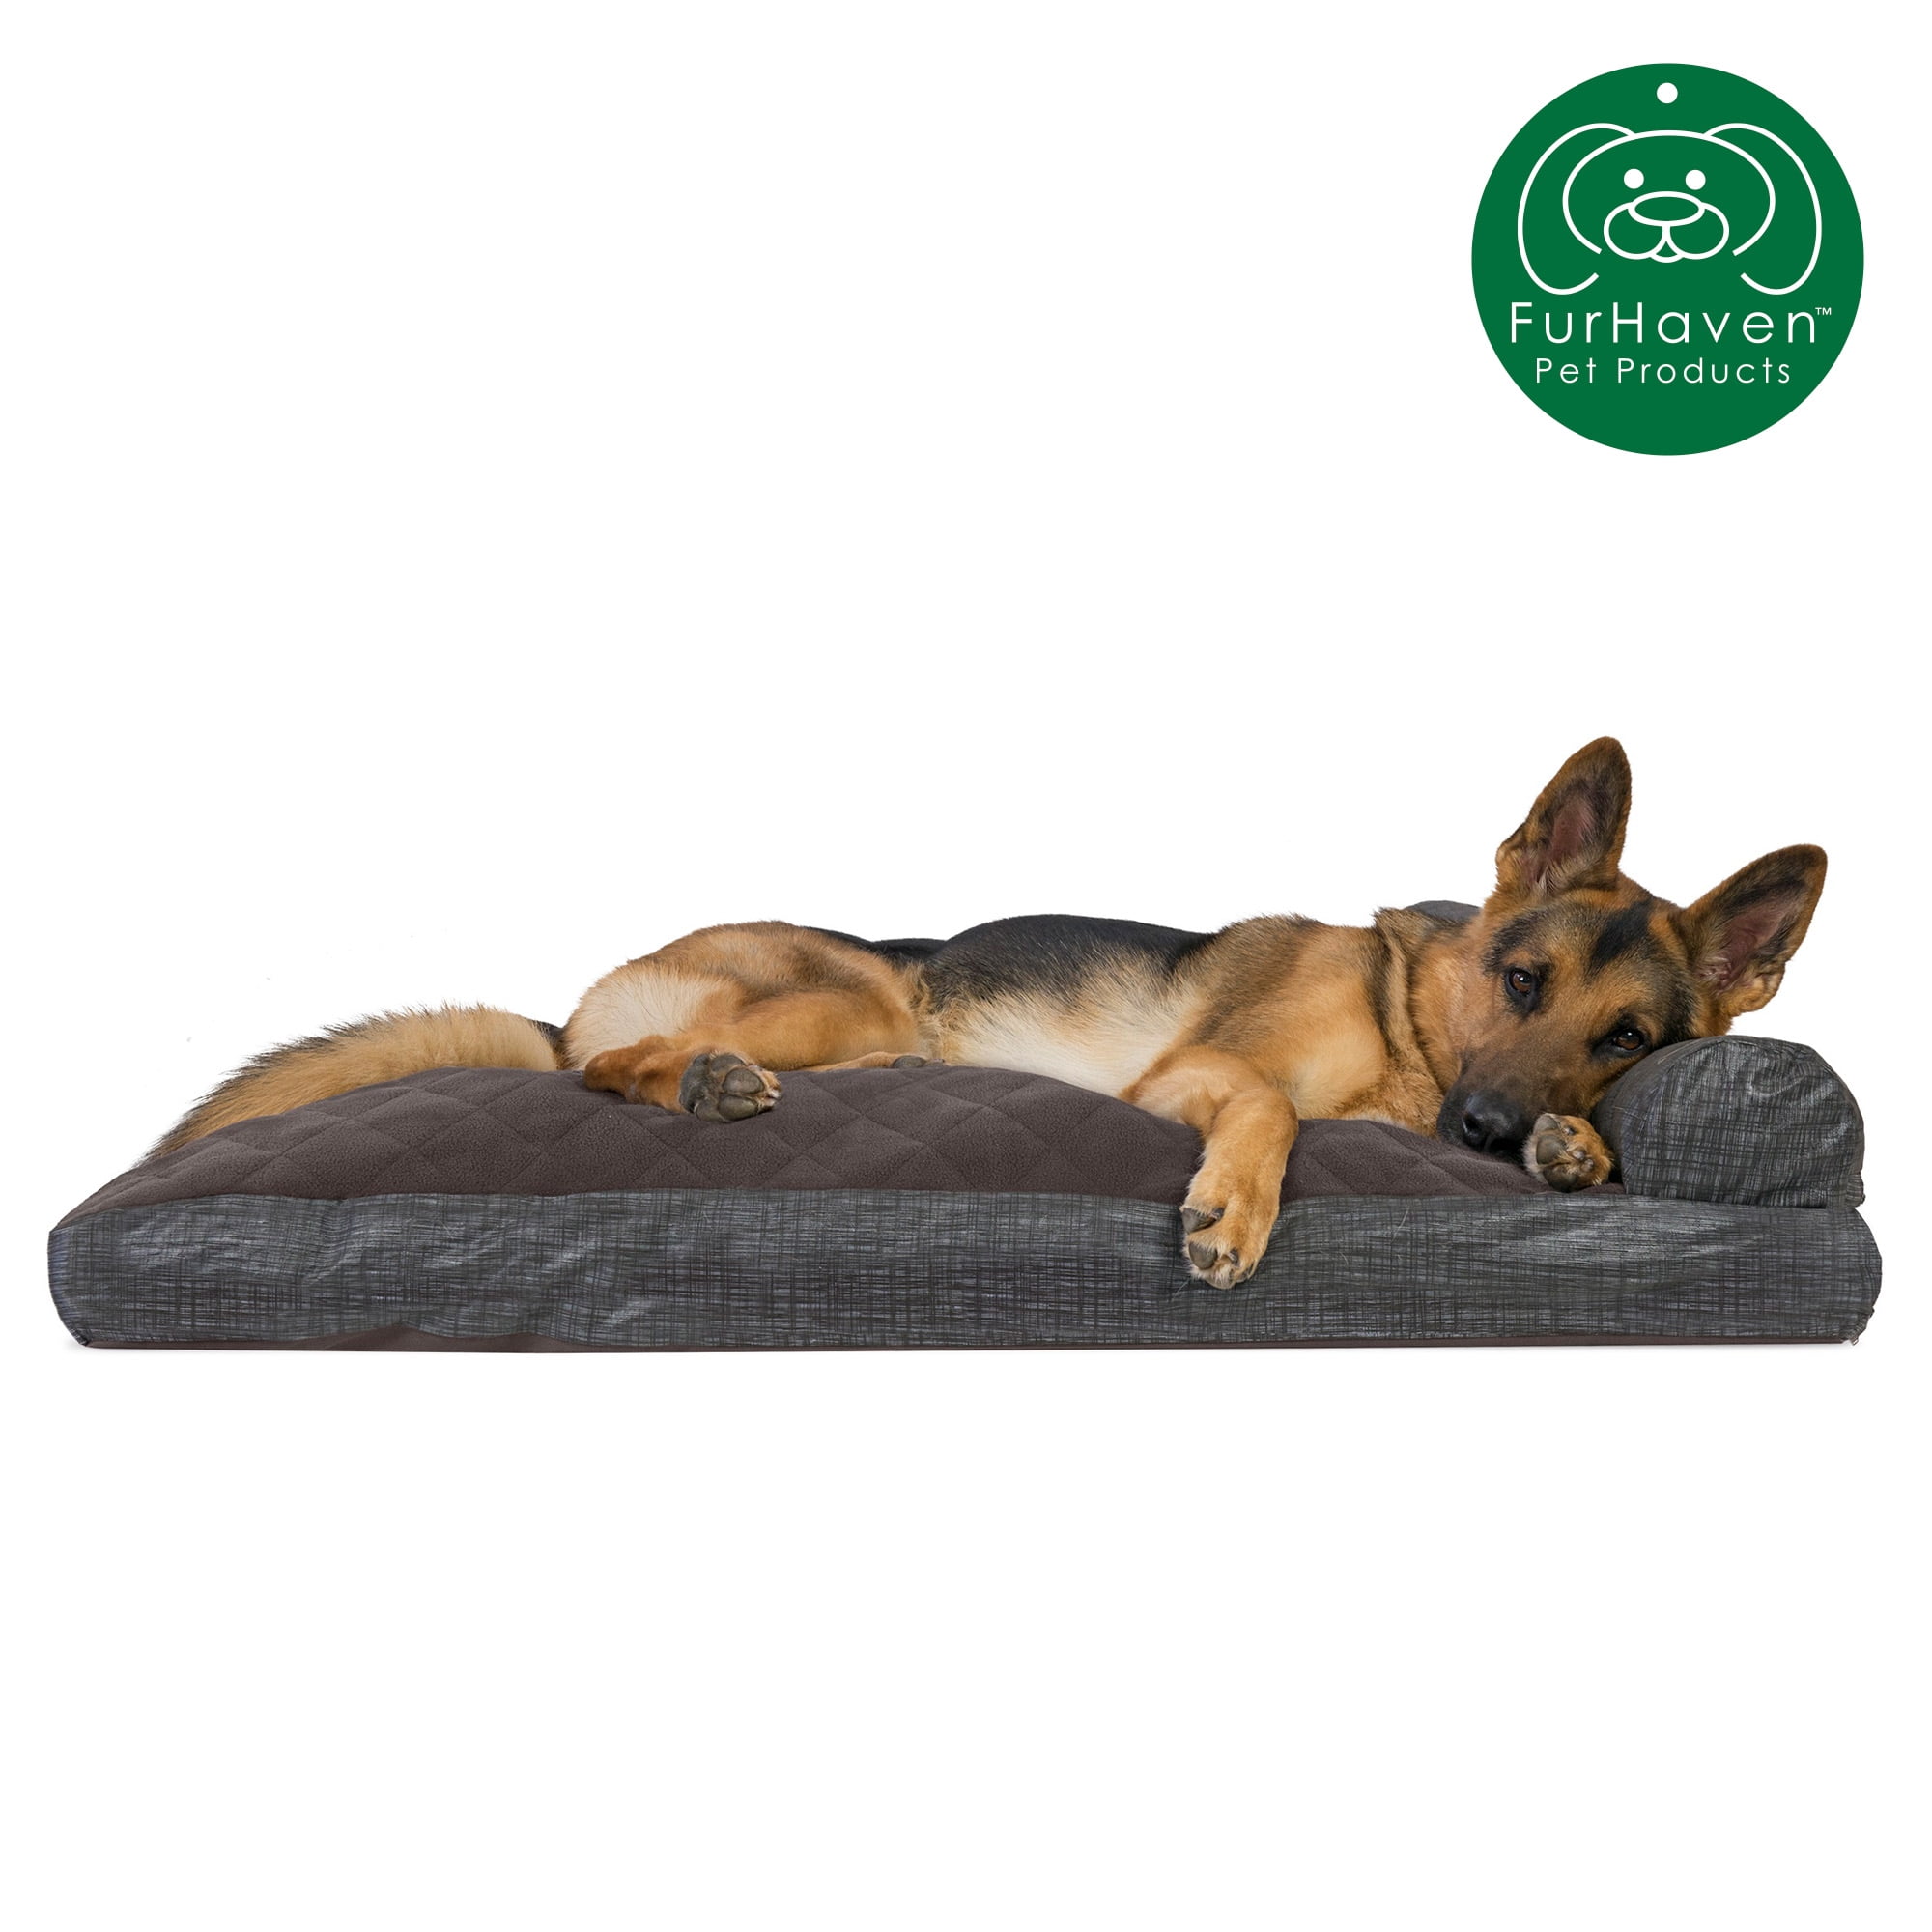 Available in Multiple Colors & Styles Deluxe Pillow Cushion Chaise Lounge Sofa-Style Living Room Couch Pet Bed w/ Removable Cover for Dogs & Cats Furhaven Pet Dog Bed